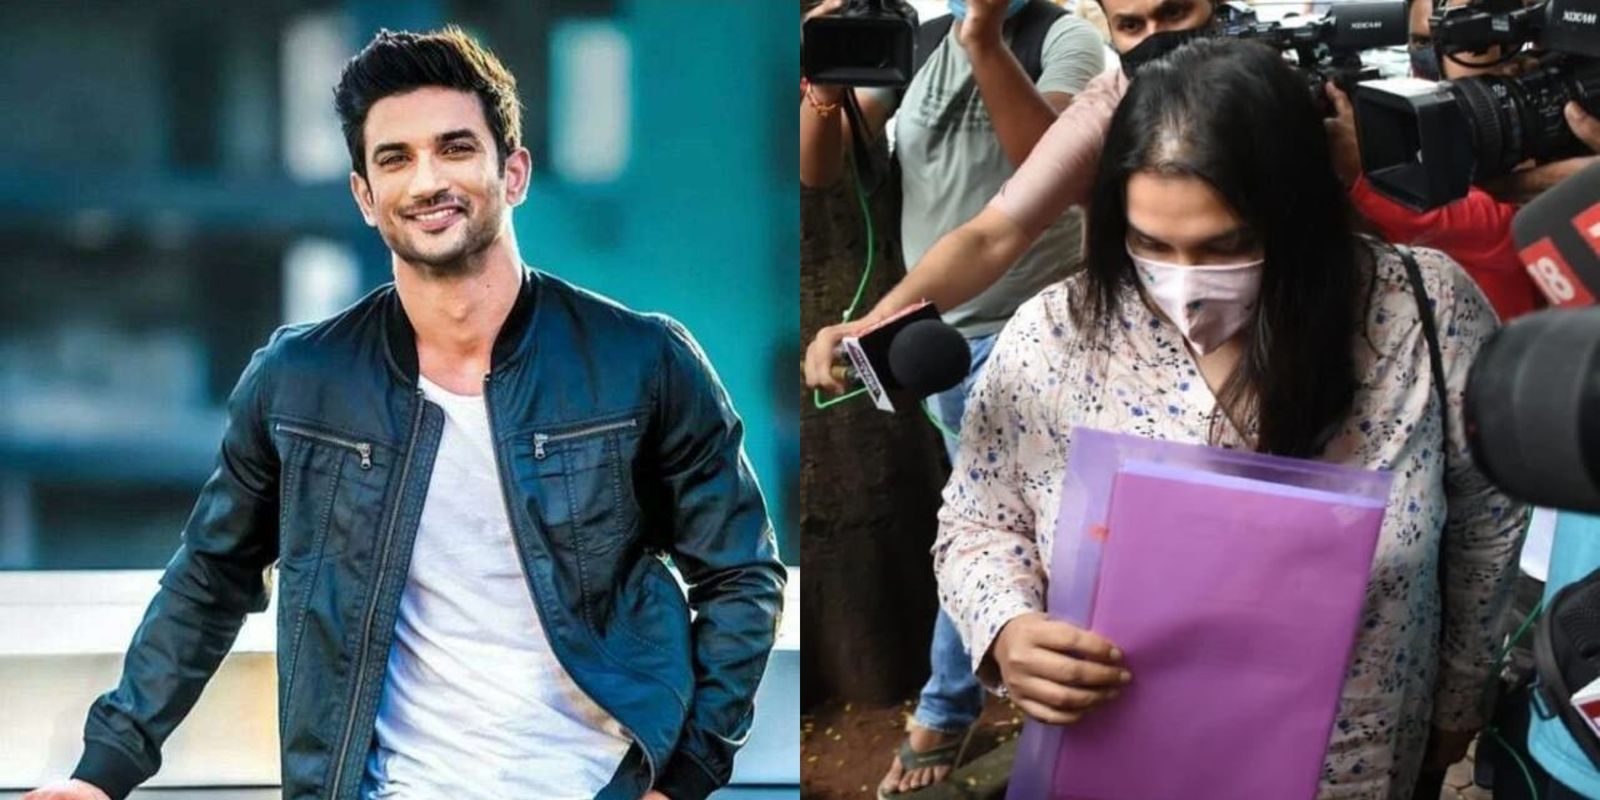 Shruti Modi Alleges Sushant Singh Rajput Was In The Hospital After Fight With Sisters, They Knew About Substance Abuse